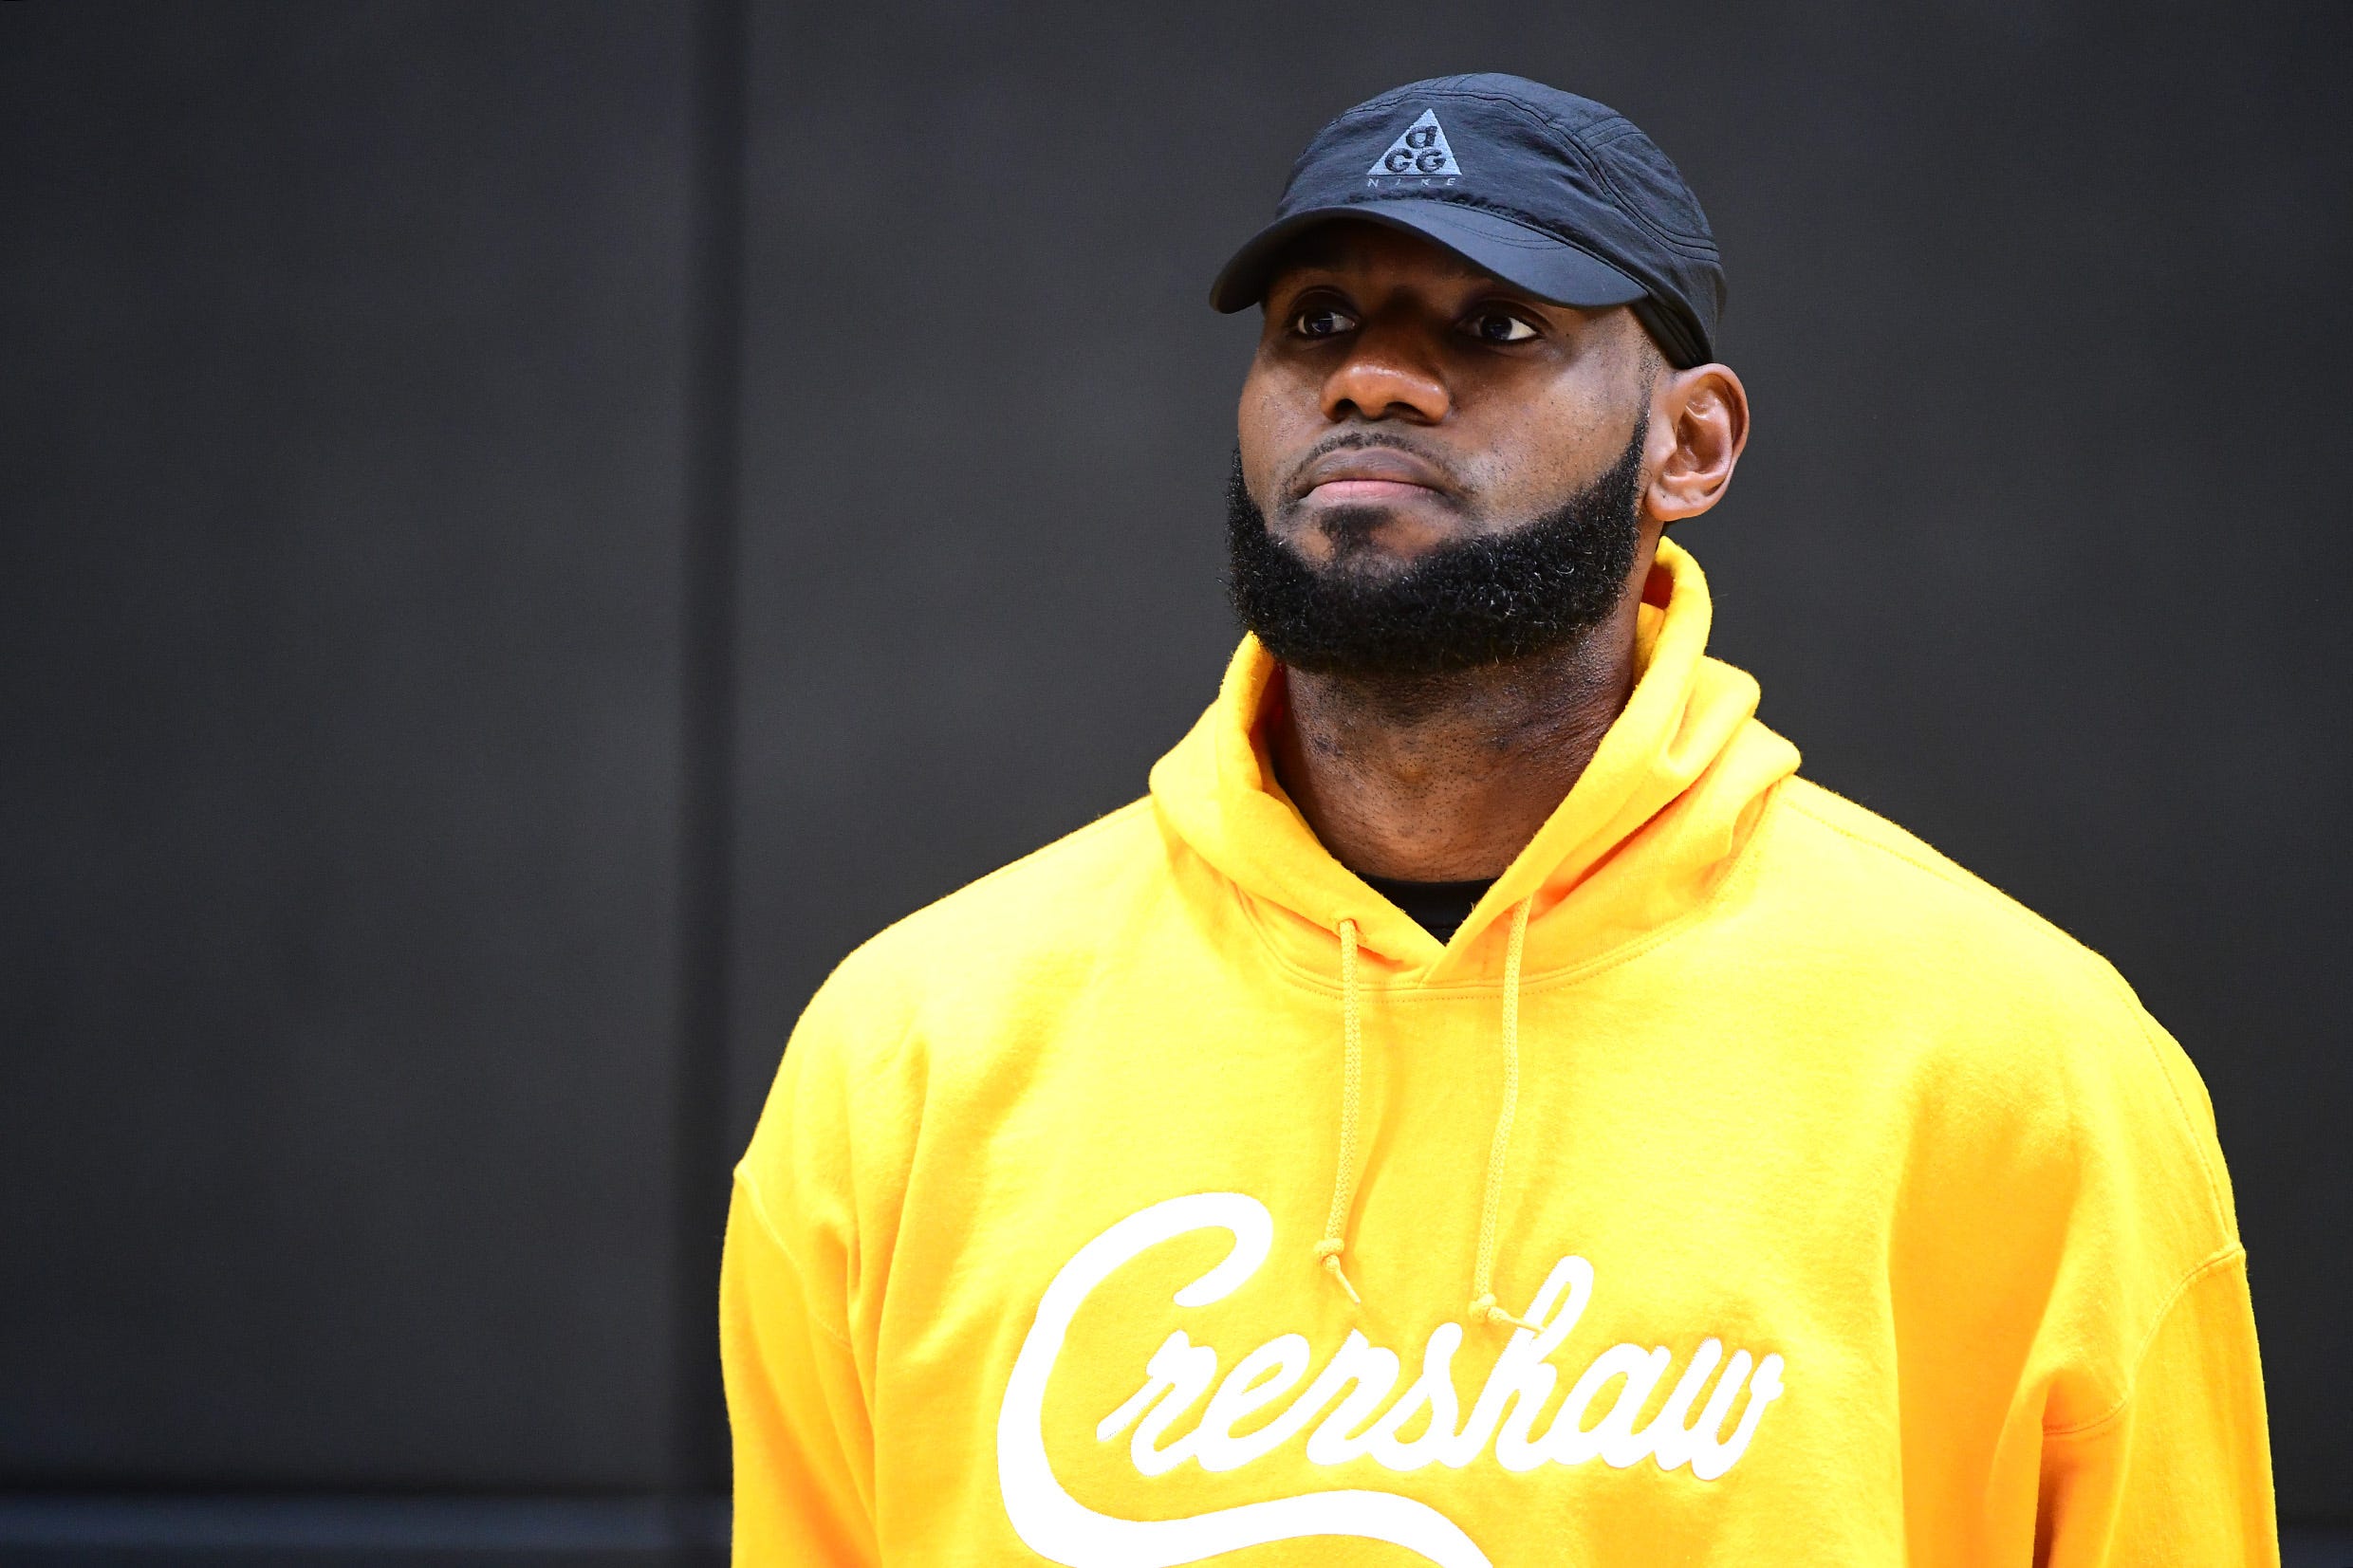 Malcolm D. Lee replaces Terence Nance as director of 'Space Jam 2' starring LeBron James